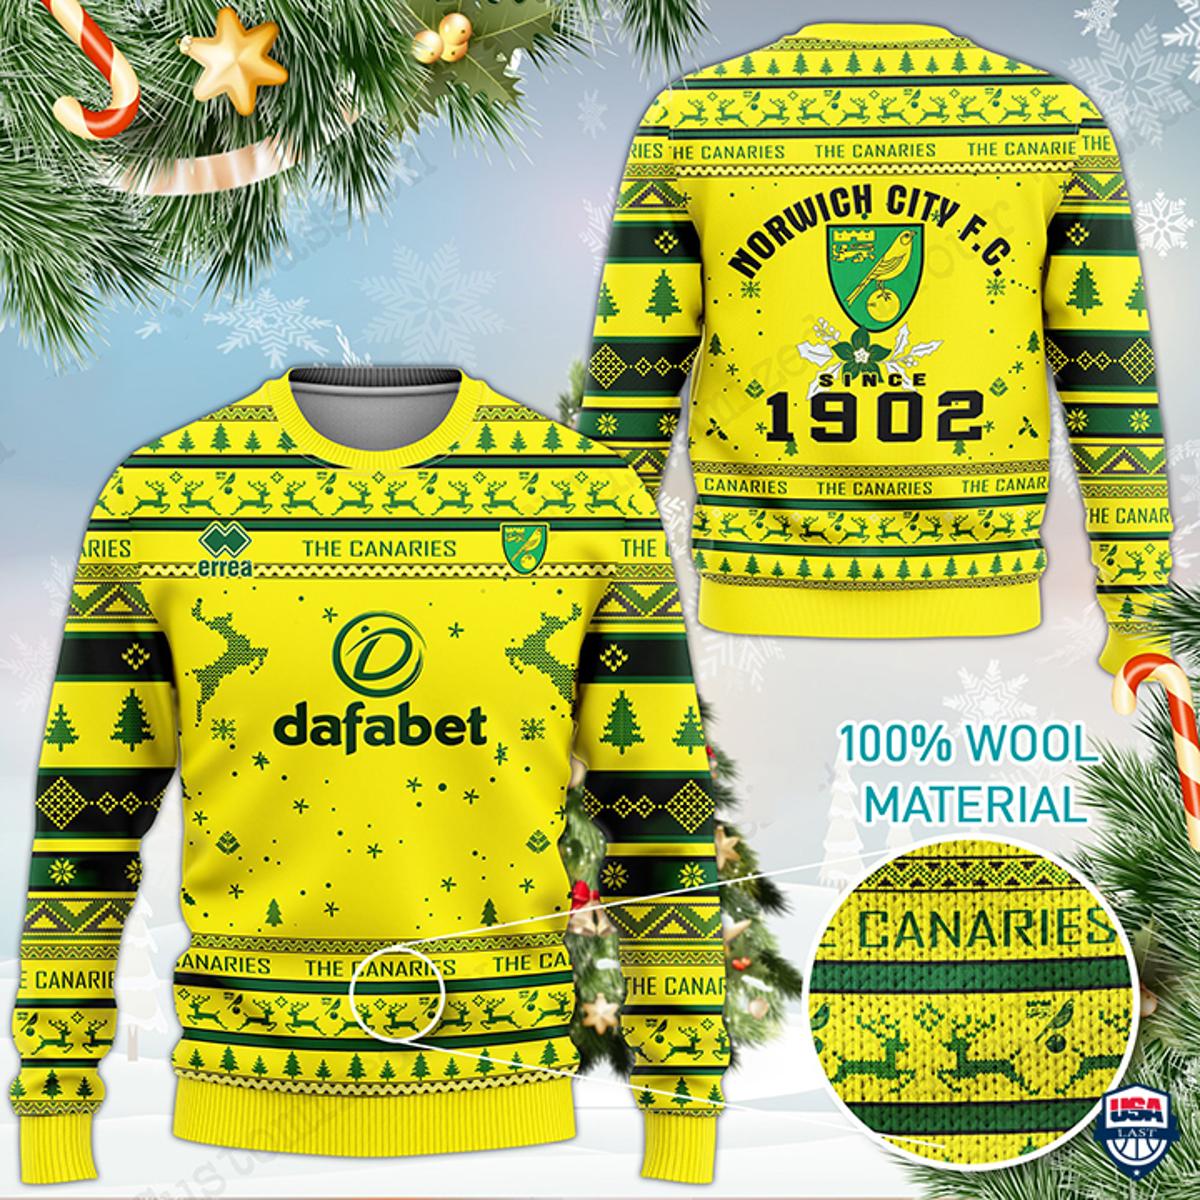 Norwich City Fc Ugly Xmas Sweater Best For Fans